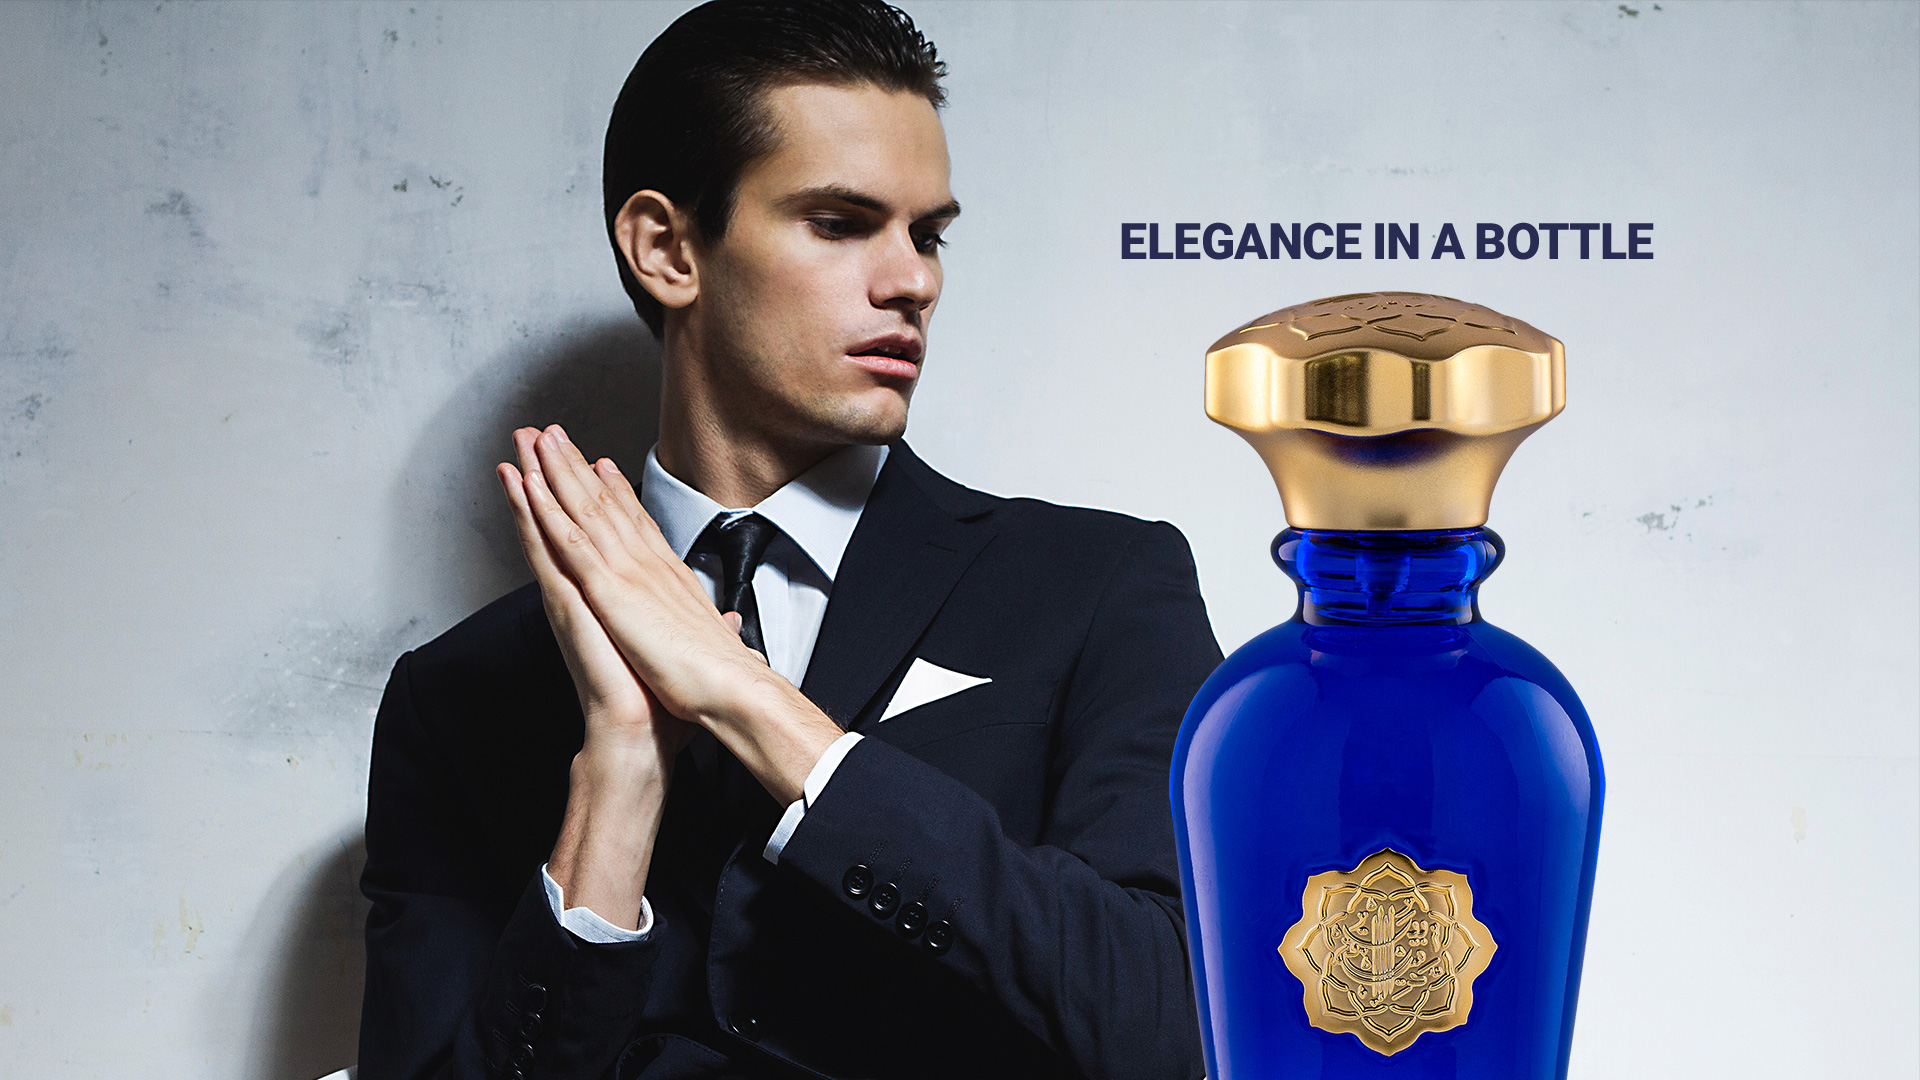 Elegance in a Bottle: Best Selling Luxury Perfumes Tailored for Men ​